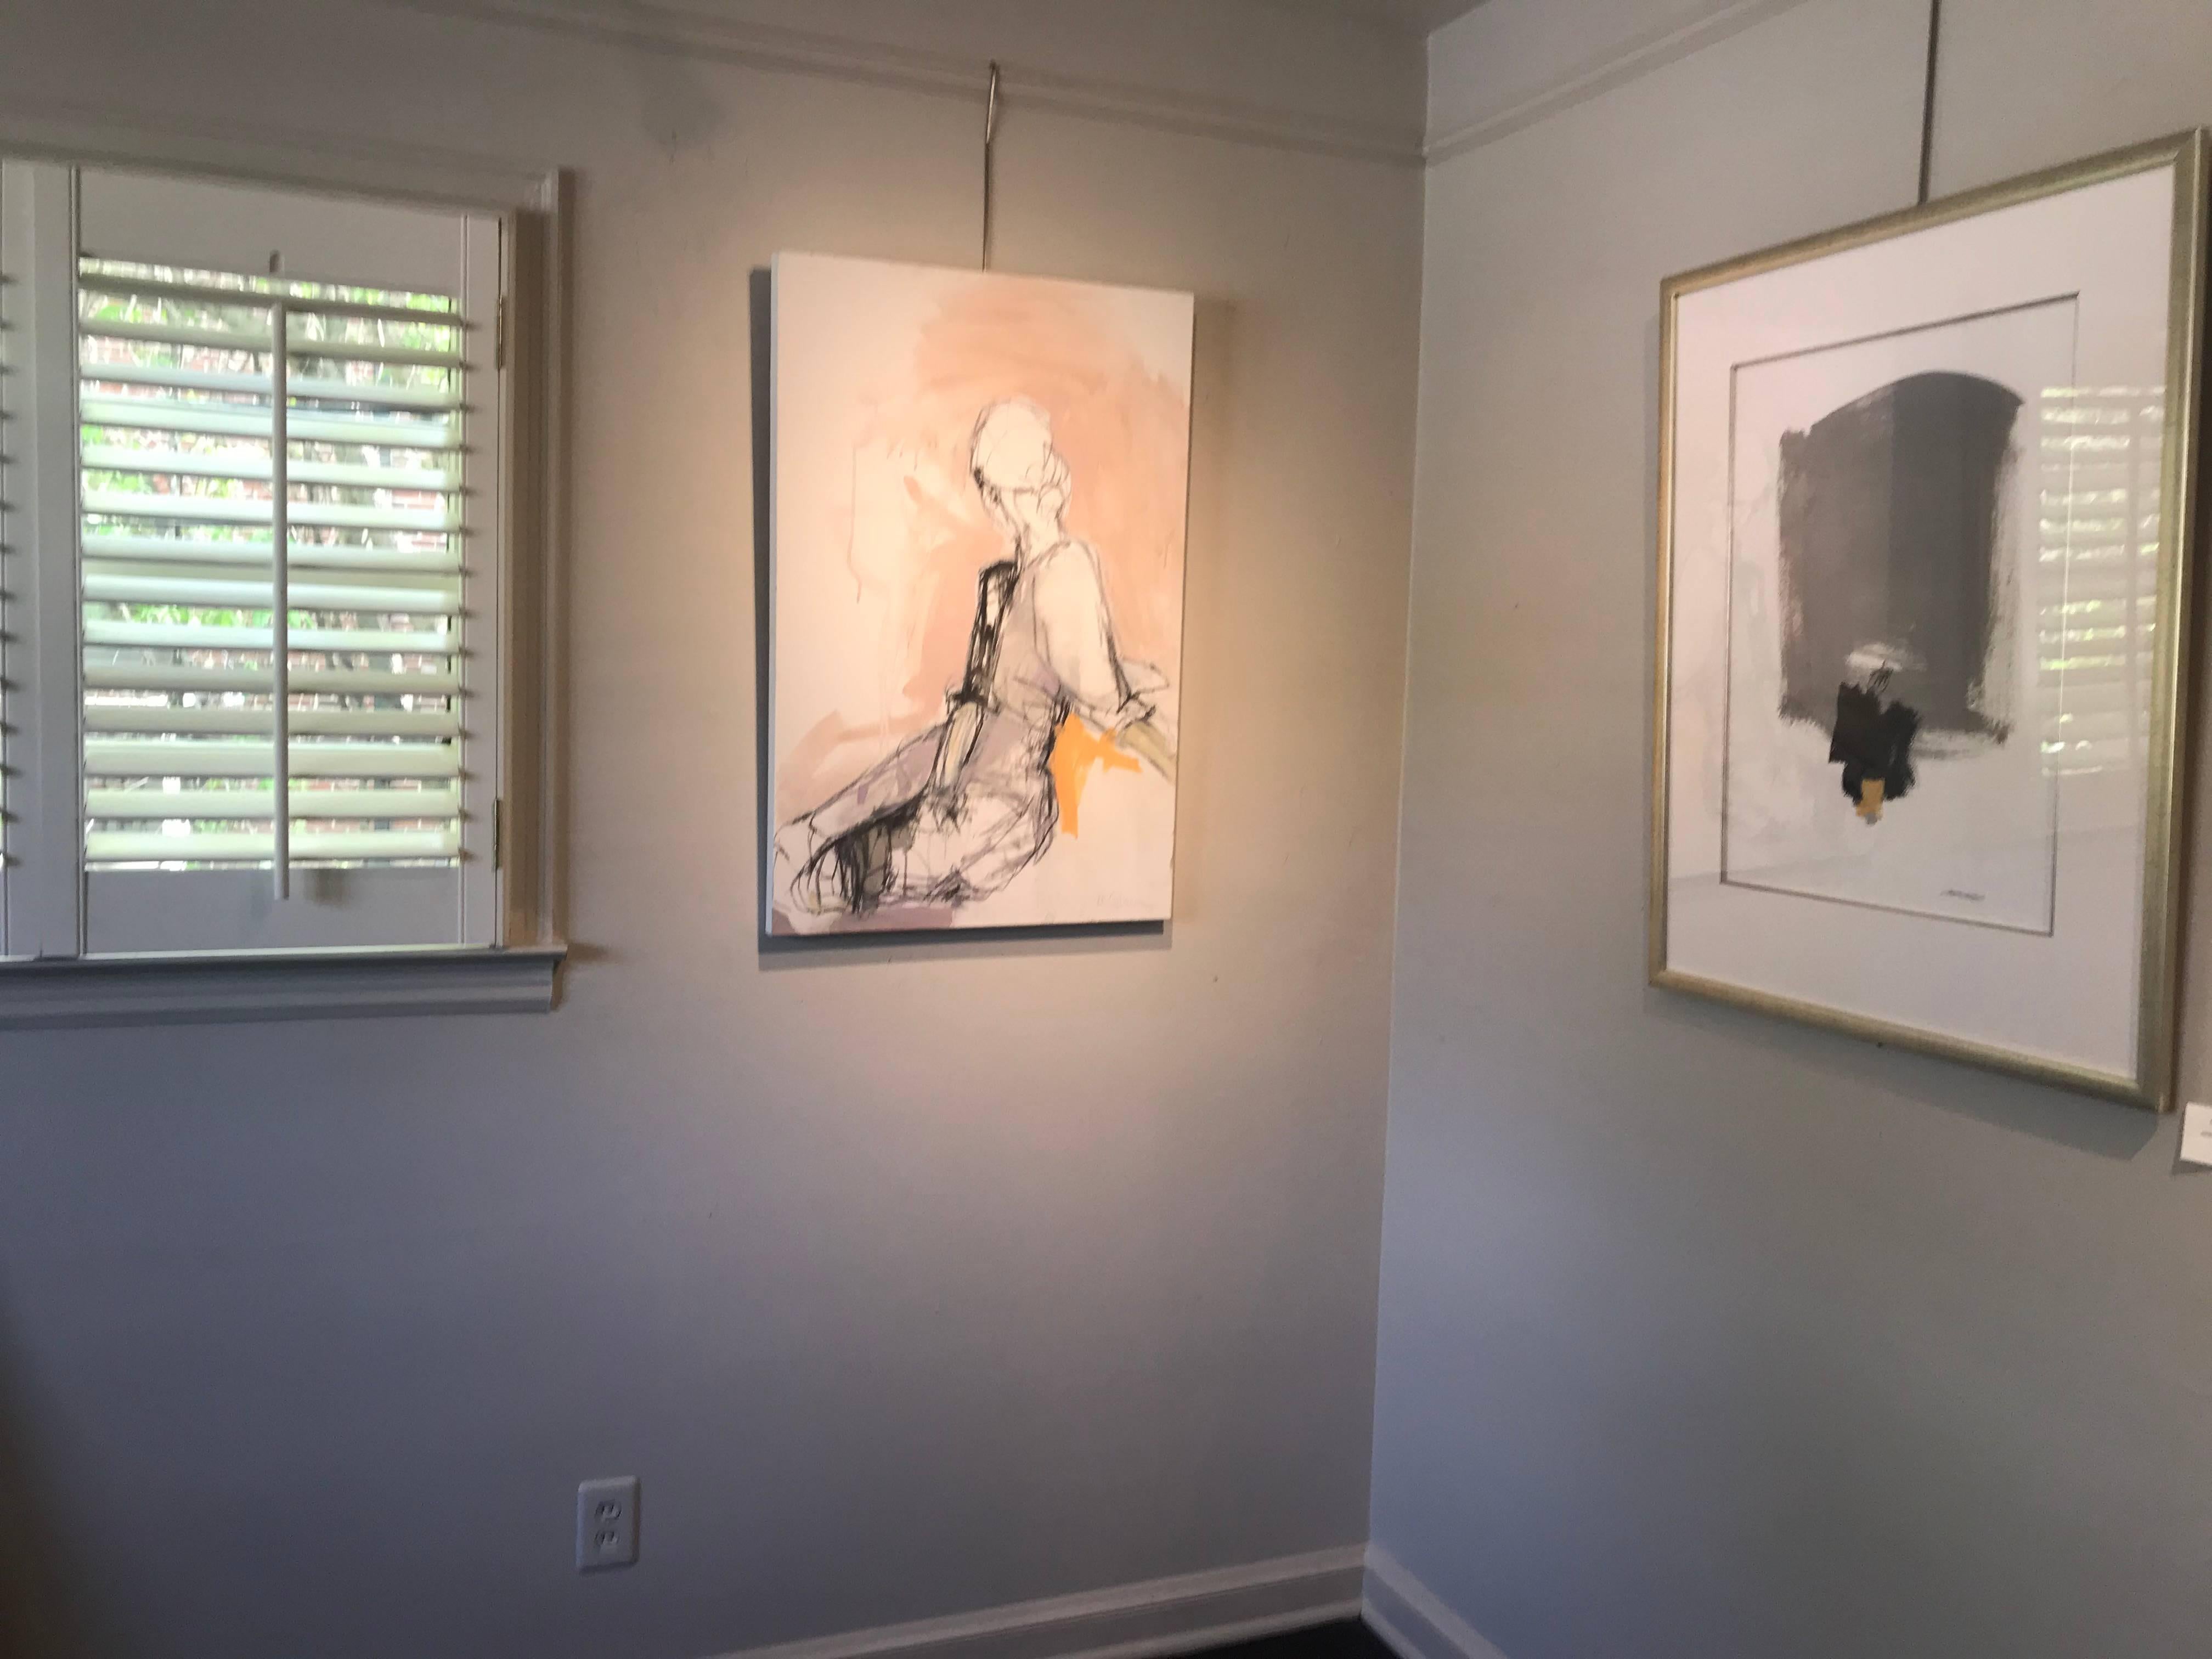 'View of Dusk' is a contemporary mixed media on canvas painting created by American artist Kelley Ogburn in 2018. This vertical format features a young lady sitting, her face turned away from us in a movement that gently twists her body. Her